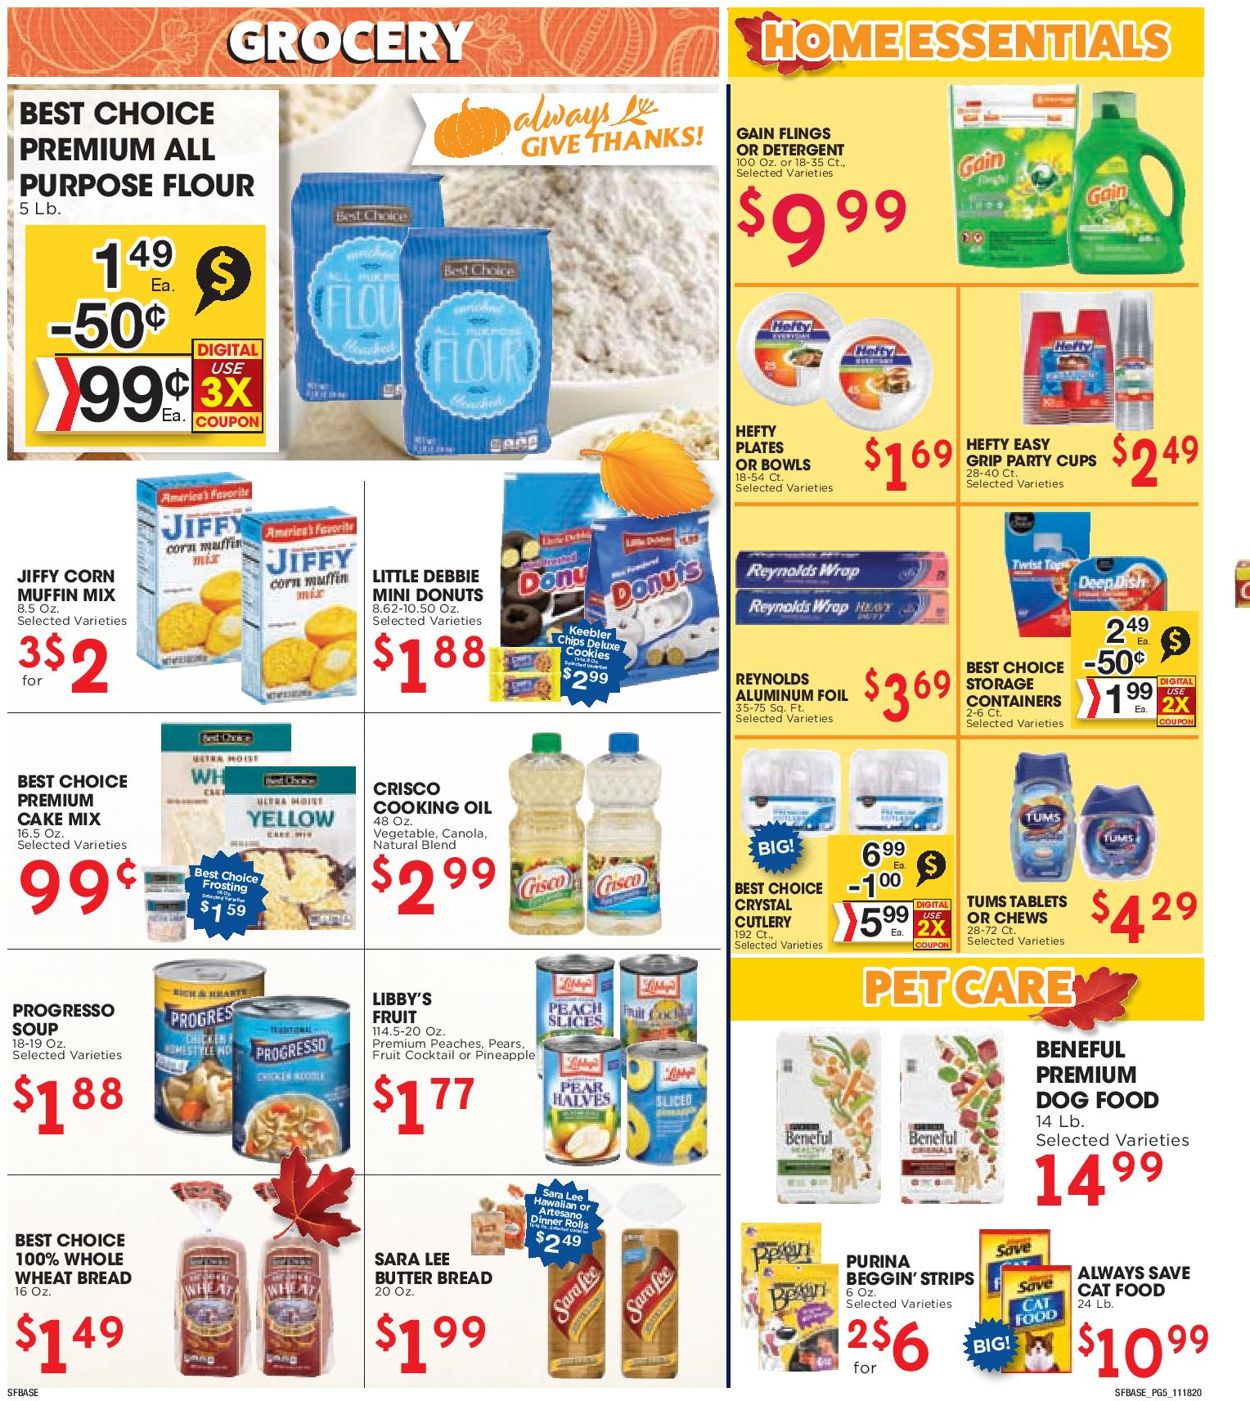 Sunshine Foods Thanksgiving ad 2020 Weekly Ad Circular - valid 11/18-11/26/2020 (Page 5)